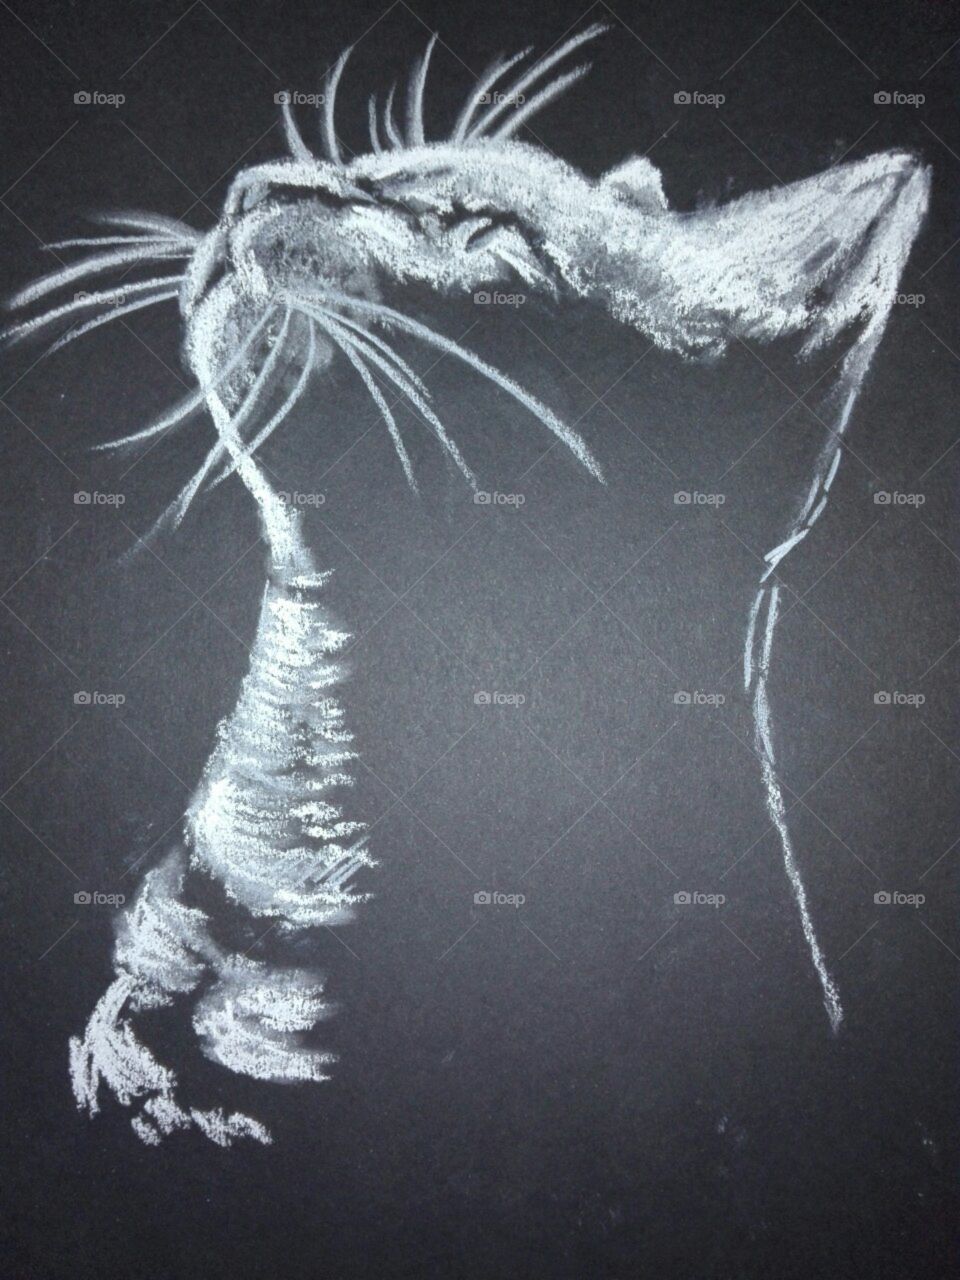 cat engraving on glass, drawing